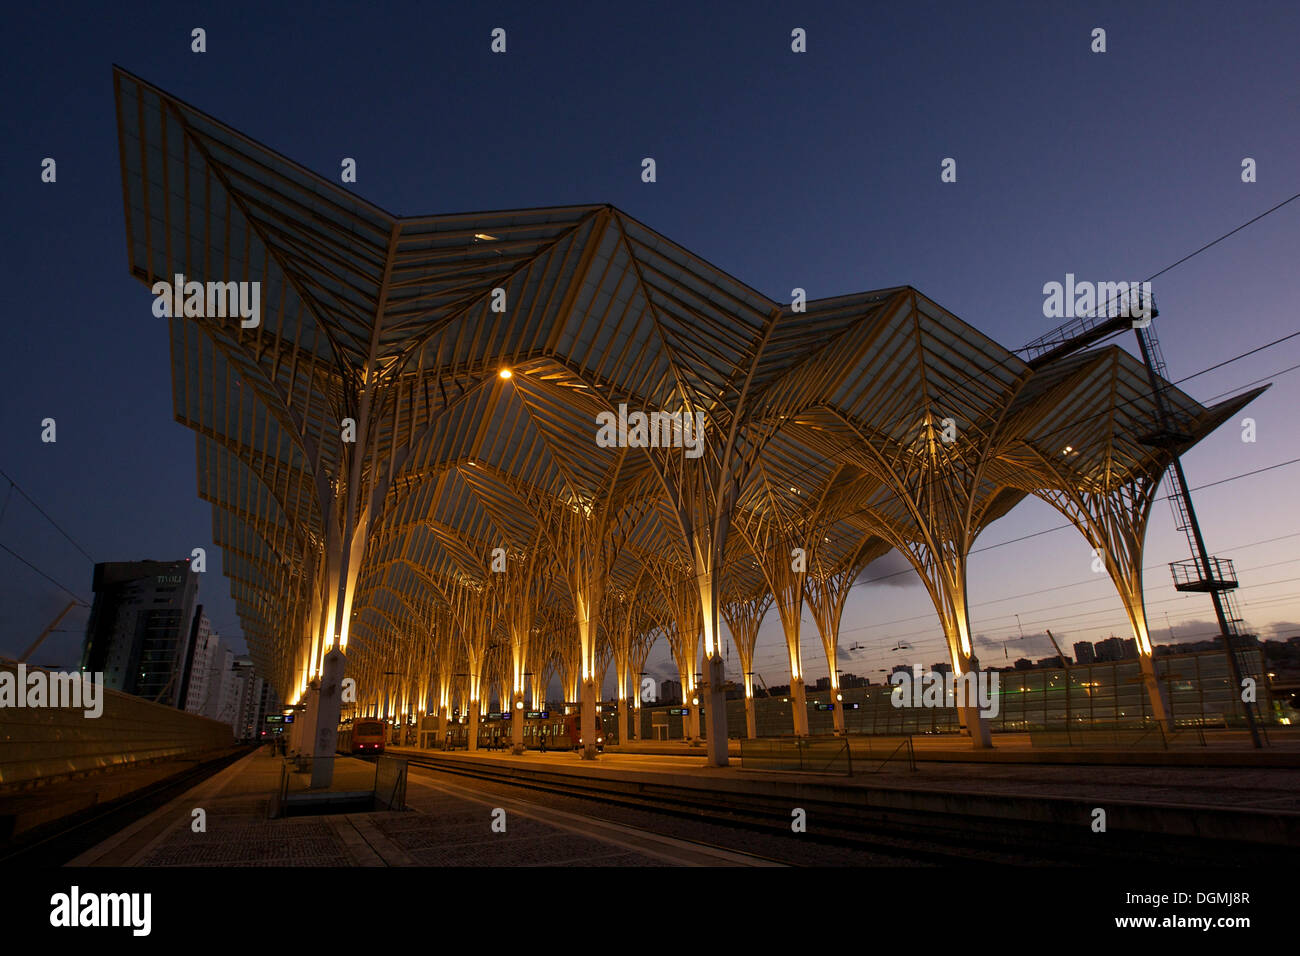 Train station Gare do Oriente at dusk, designed by architect Santiago Calatrava in the grounds of the Parque das Naçoes Stock Photo